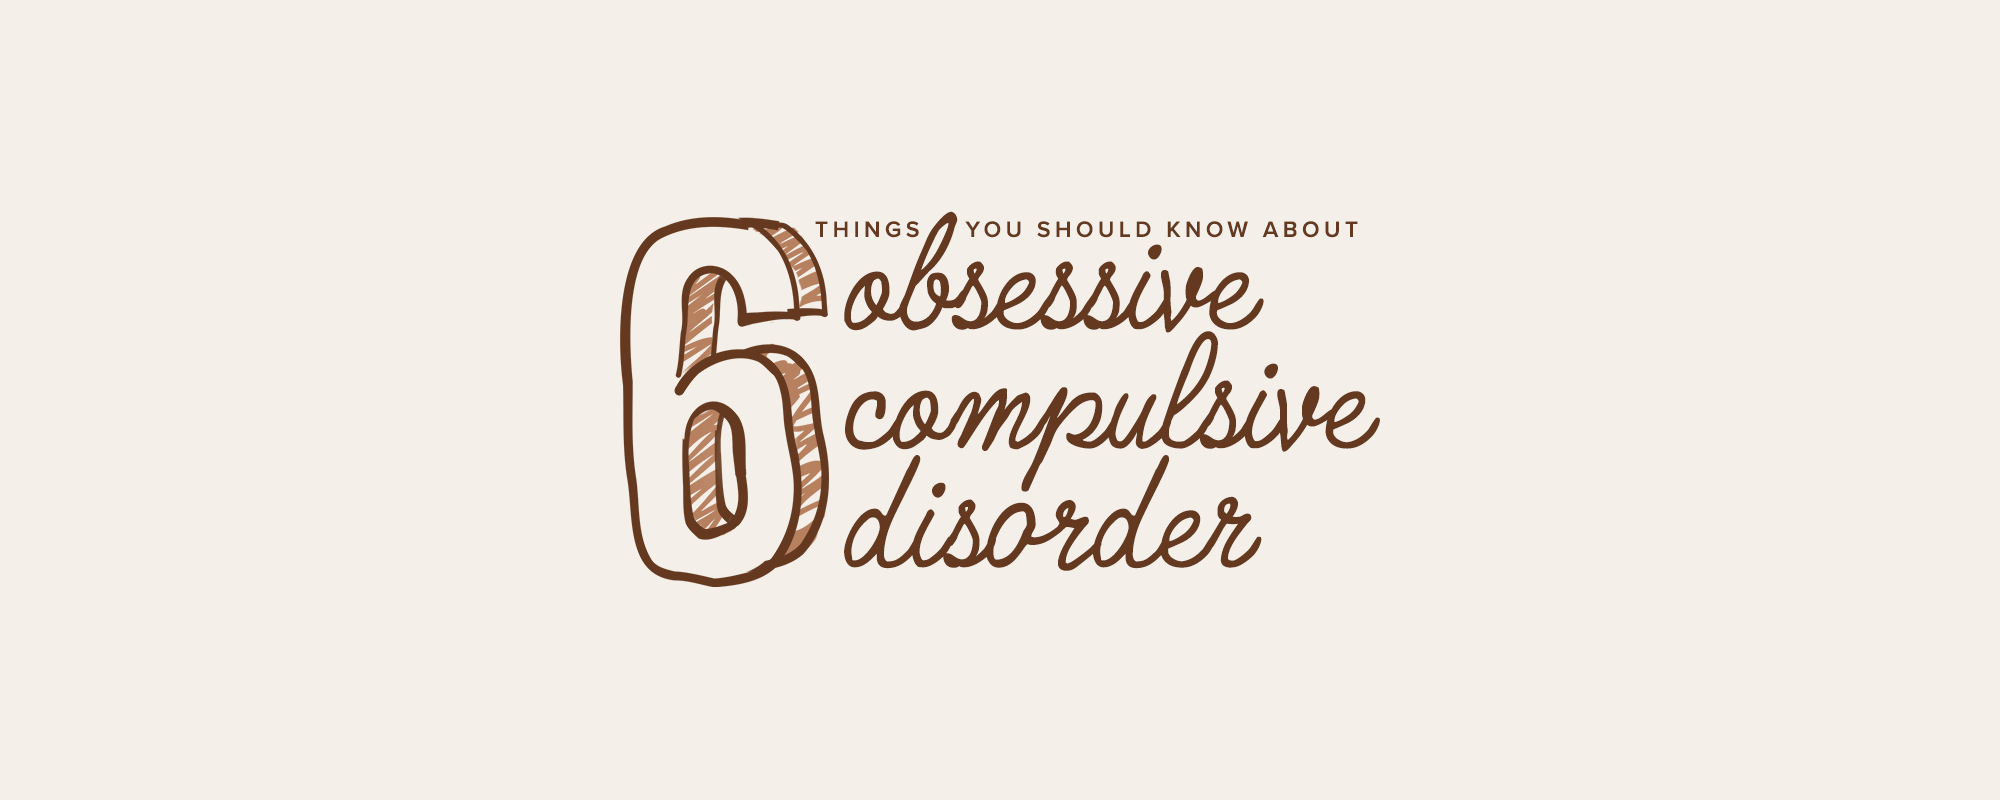 6 things you should know about Obsessive Compulsive Disorder